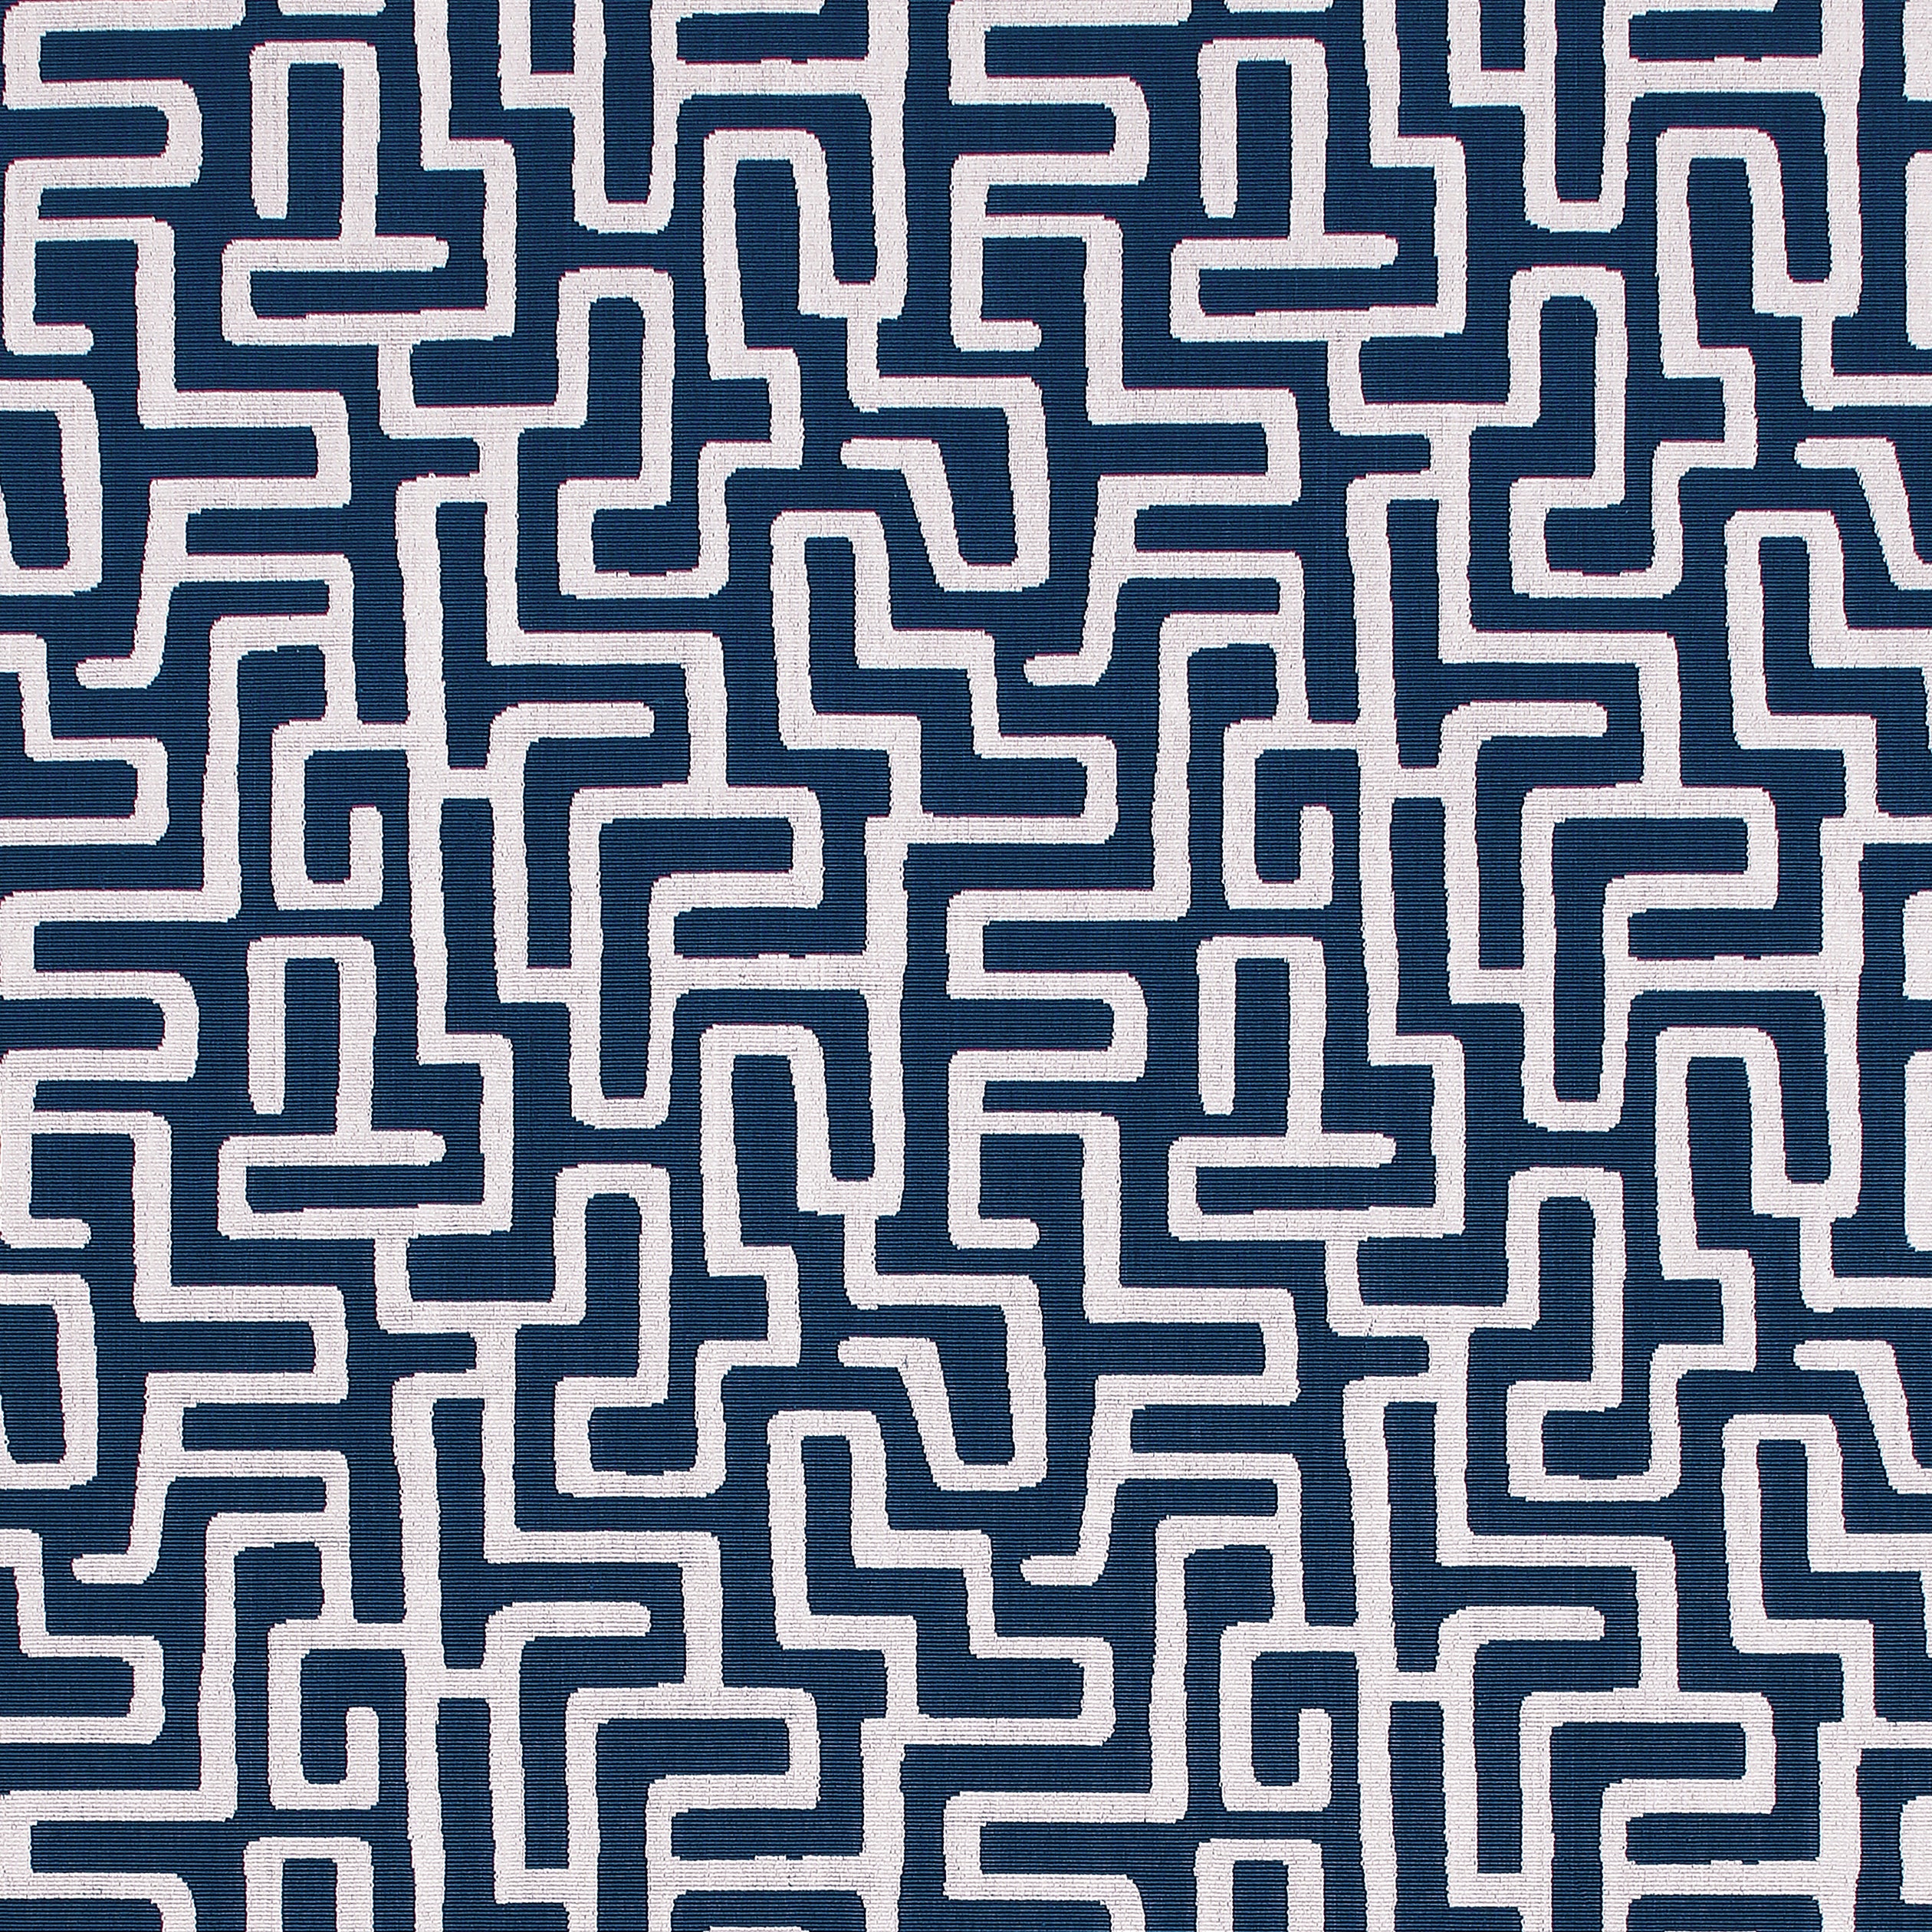 Terrace Lane fabric in navy color - pattern number W742031 - by Thibaut in the Sojourn collection